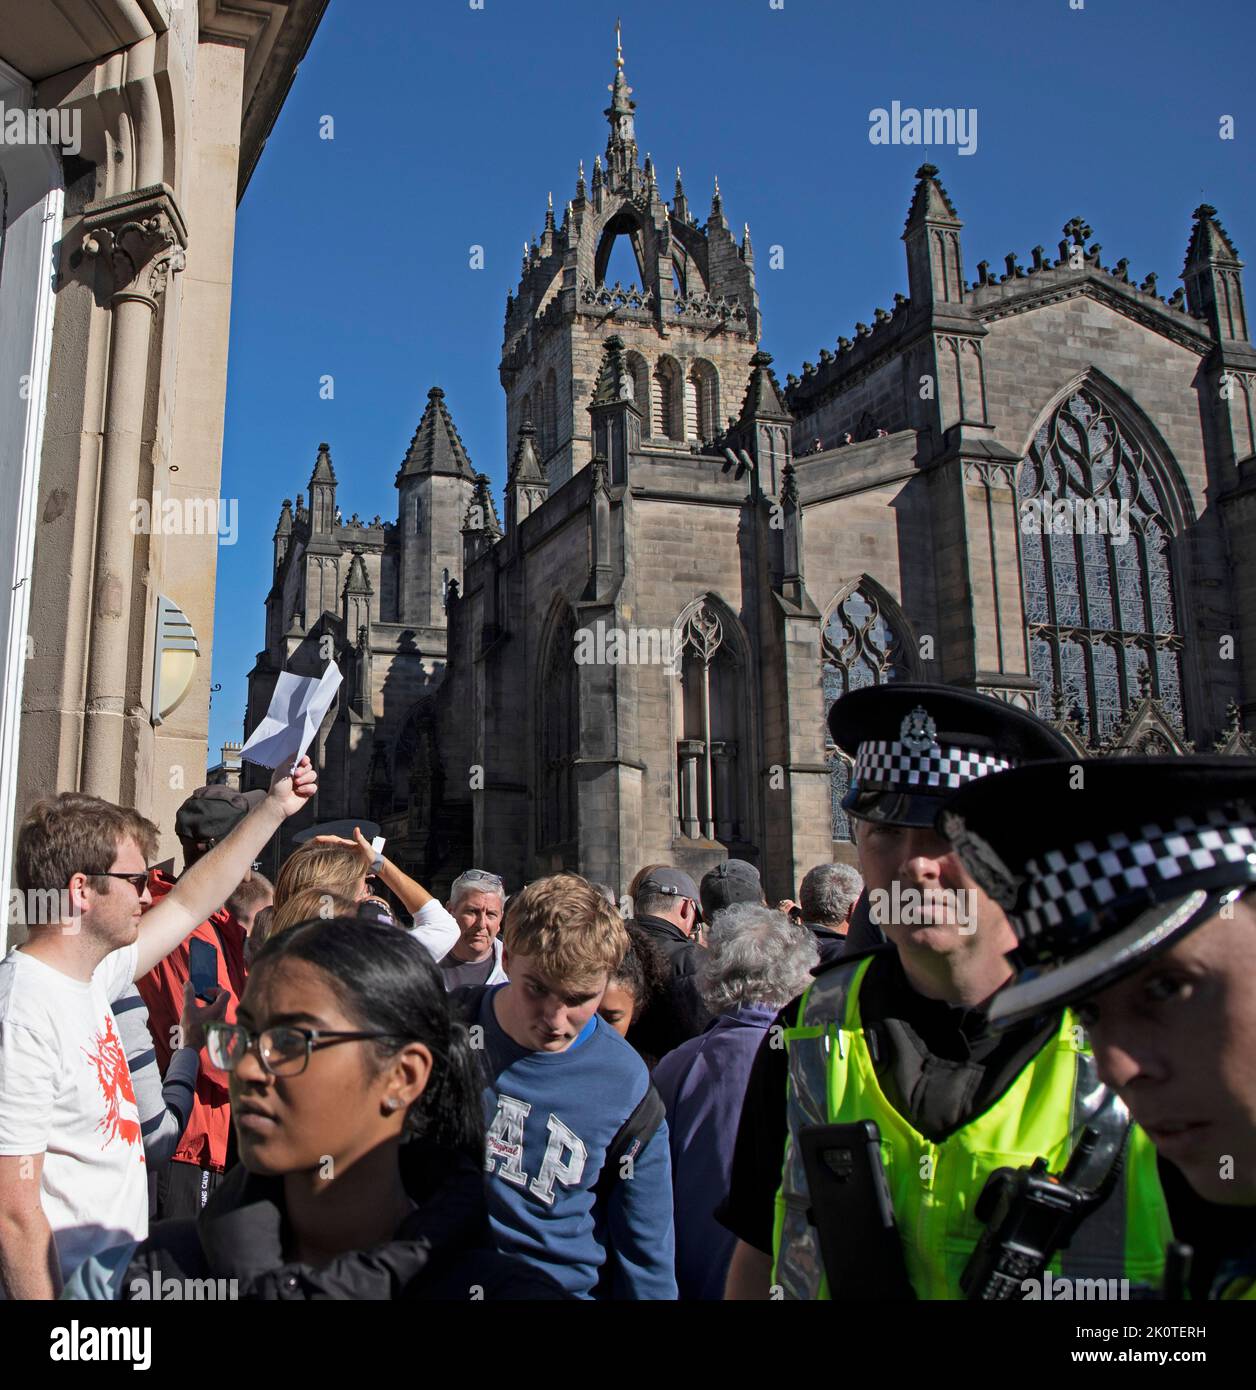 Royal Mile, Edinburgh, Scotland, UK. Crowds gather for Coffin of Her Majesty Queen Elizabeth II departing St Giles Cathedral. 13th September 2022. Pictured: One young man holds up a piece of paper as a protest, believed to be blank as police officers and pedestrians pass. Credit: Arch White/alamy live news. Stock Photo